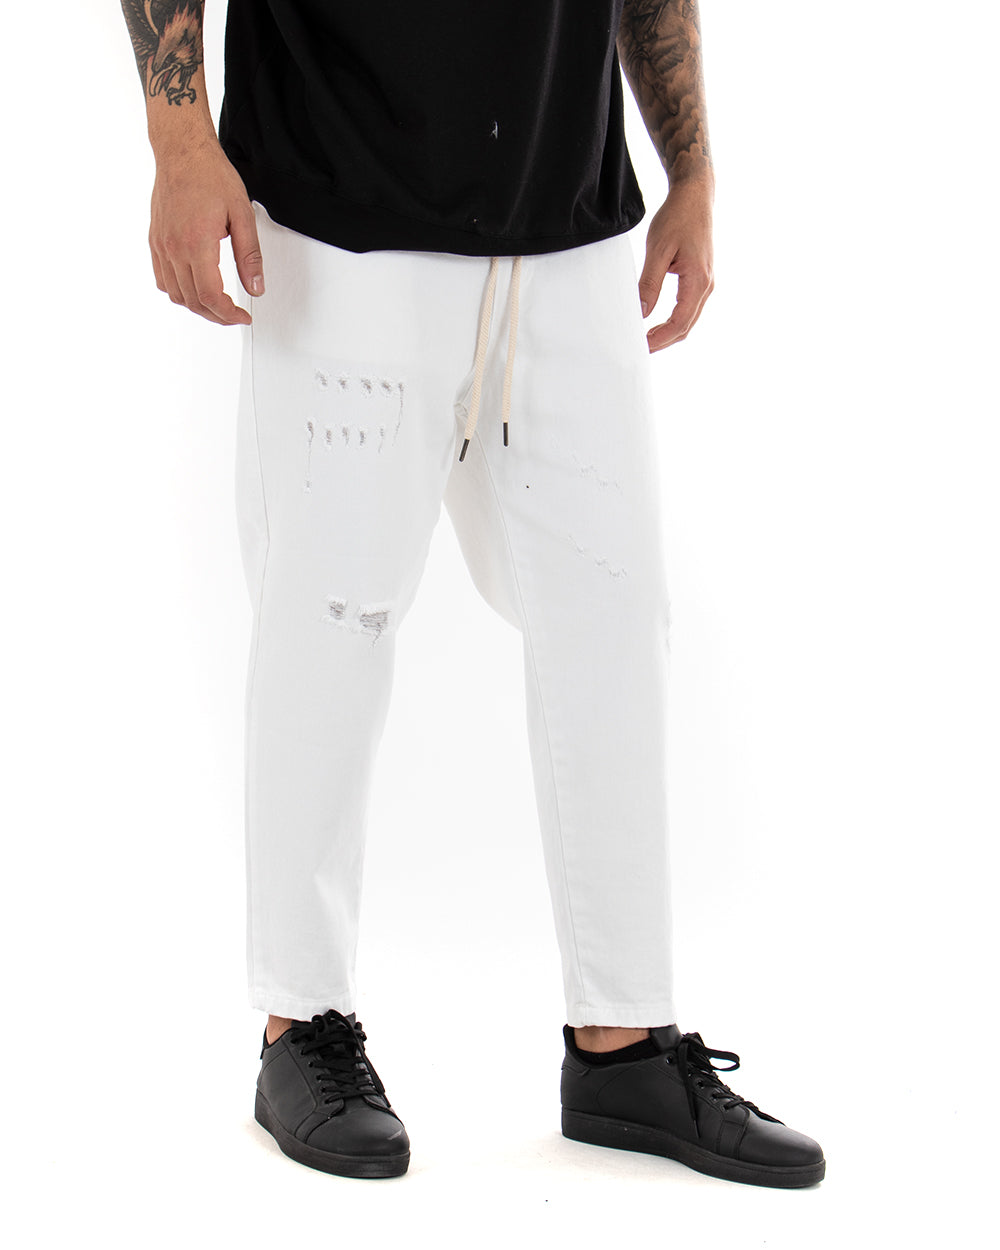 Men's Jeans Trousers Regular Fit White Bull Trousers With Casual Rips GIOSAL-P4098A